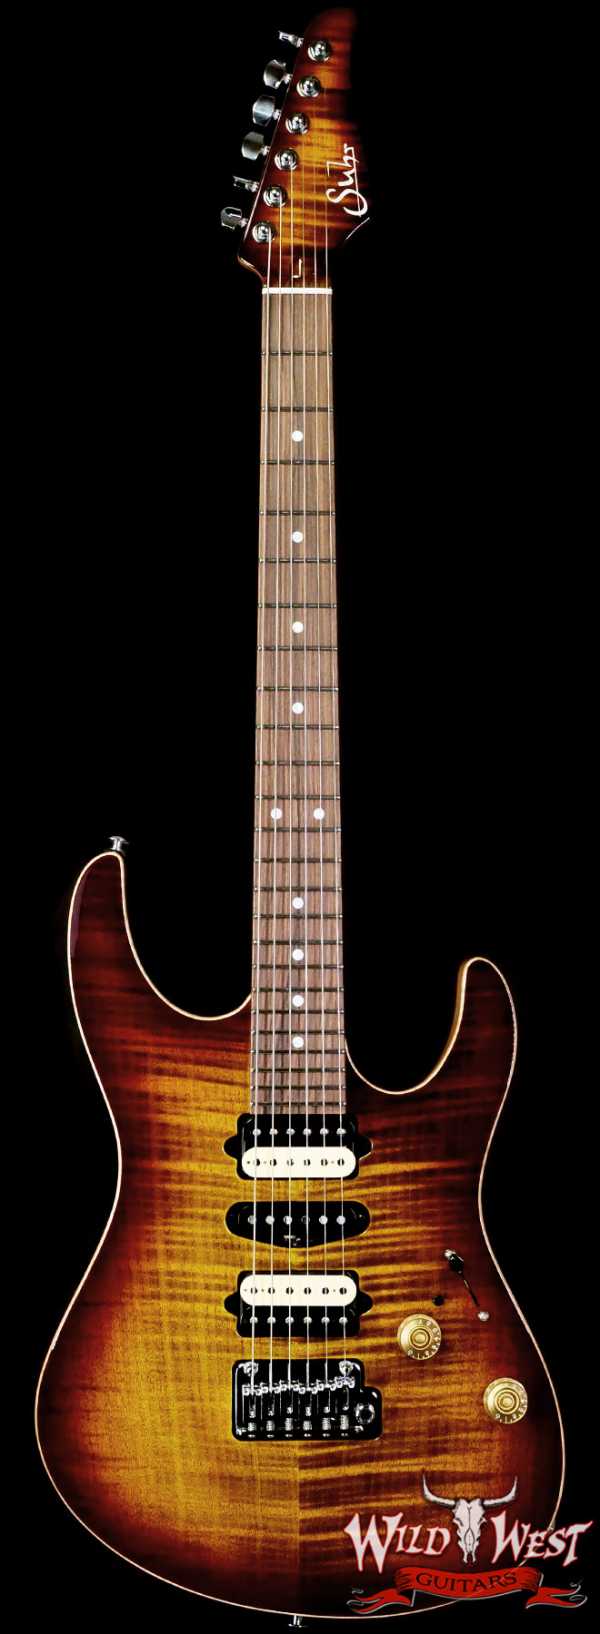 Suhr Custom Modern HSH with Blower Switch Flame Maple Top Bengal Burst 7.40 LBS